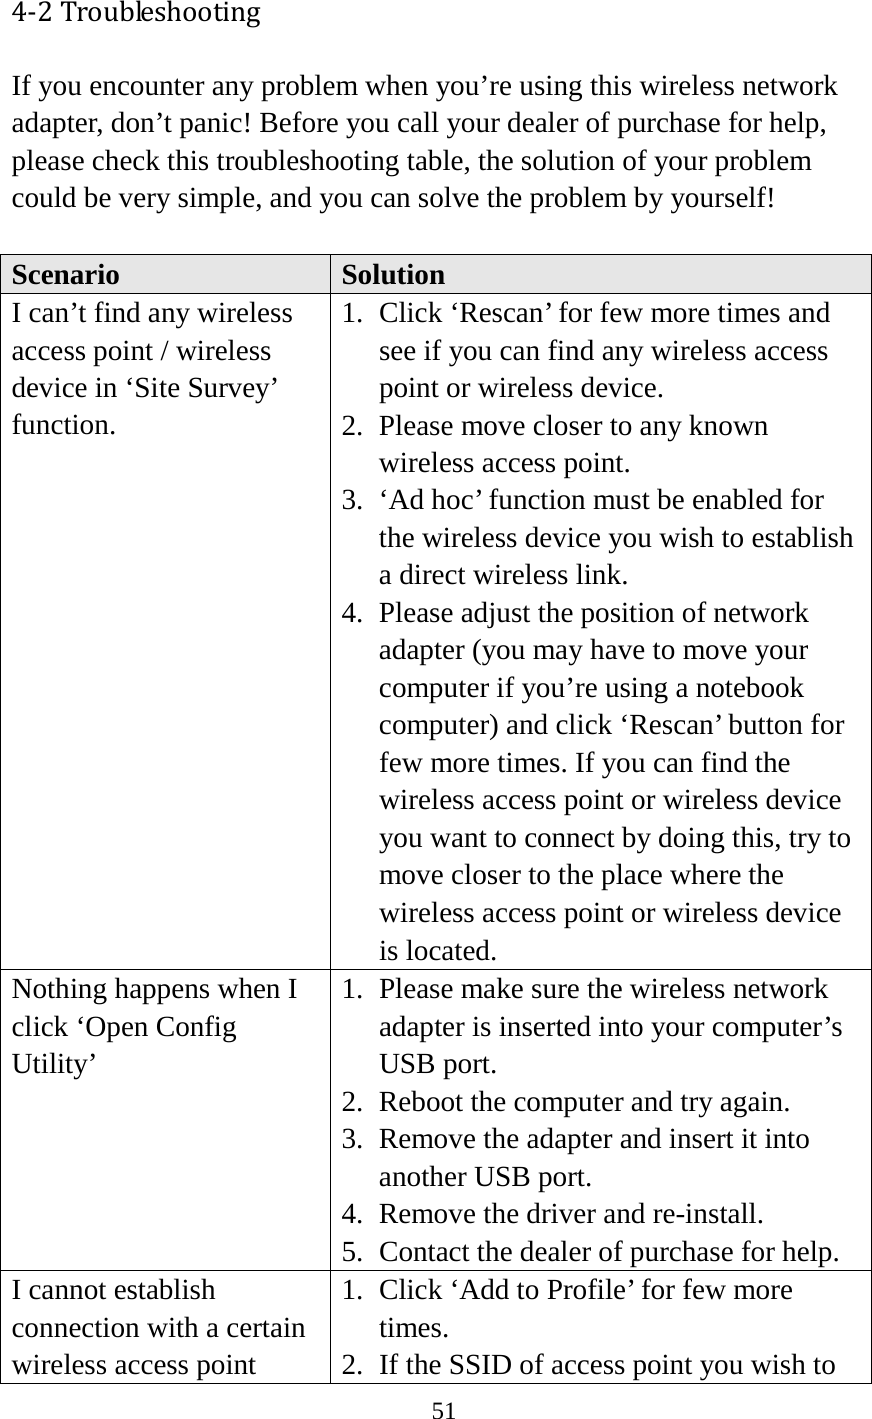 51  4-2 Troubleshooting If you encounter any problem when you’re using this wireless network adapter, don’t panic! Before you call your dealer of purchase for help, please check this troubleshooting table, the solution of your problem could be very simple, and you can solve the problem by yourself!  Scenario Solution I can’t find any wireless access point / wireless device in ‘Site Survey’ function. 1. Click ‘Rescan’ for few more times and see if you can find any wireless access point or wireless device. 2. Please move closer to any known wireless access point. 3. ‘Ad hoc’ function must be enabled for the wireless device you wish to establish a direct wireless link. 4. Please adjust the position of network adapter (you may have to move your computer if you’re using a notebook computer) and click ‘Rescan’ button for few more times. If you can find the wireless access point or wireless device you want to connect by doing this, try to move closer to the place where the wireless access point or wireless device is located. Nothing happens when I click ‘Open Config Utility’ 1. Please make sure the wireless network adapter is inserted into your computer’s USB port.   2. Reboot the computer and try again. 3. Remove the adapter and insert it into another USB port. 4. Remove the driver and re-install. 5. Contact the dealer of purchase for help. I cannot establish connection with a certain wireless access point 1. Click ‘Add to Profile’ for few more times. 2. If the SSID of access point you wish to 